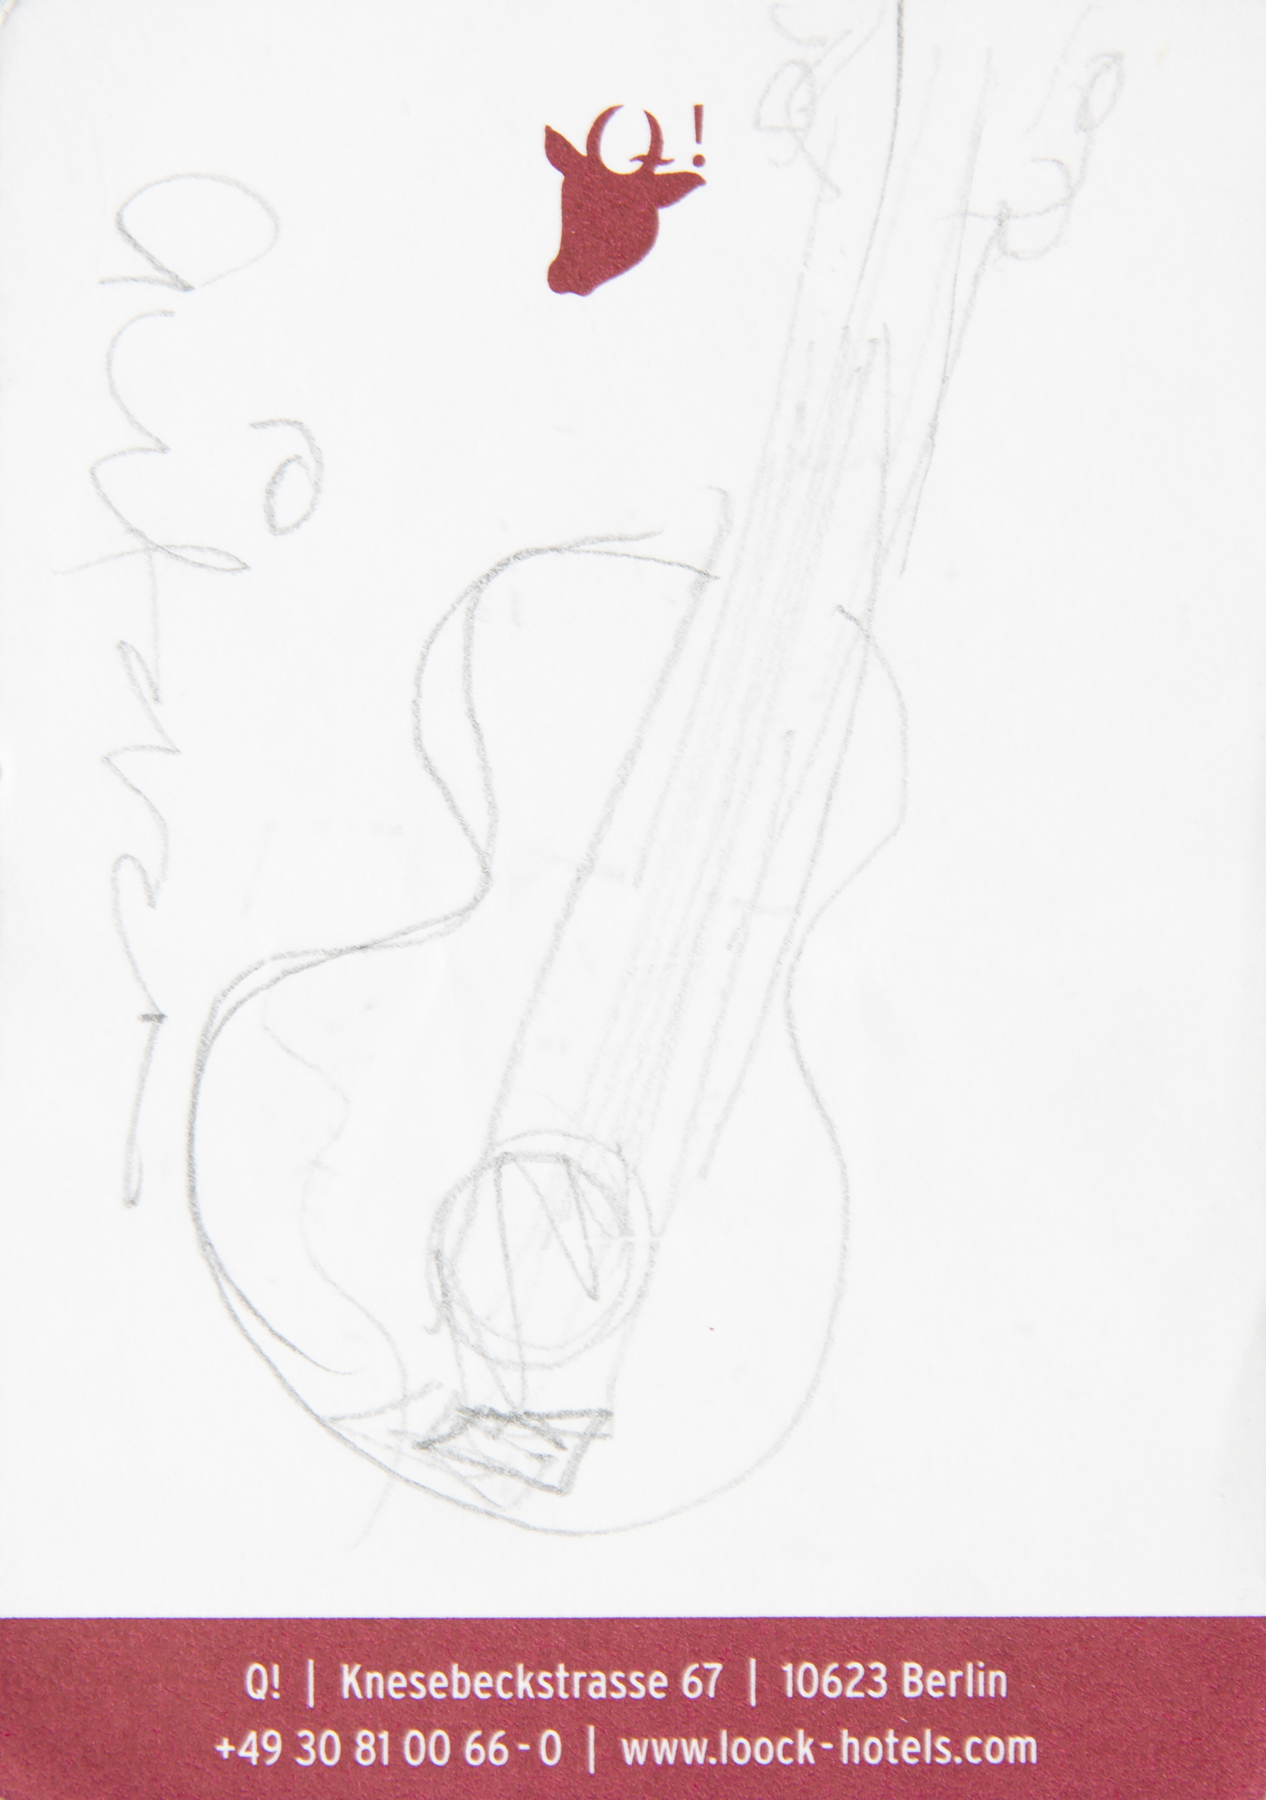 A sketch by Amy Winehouse being sold at auction